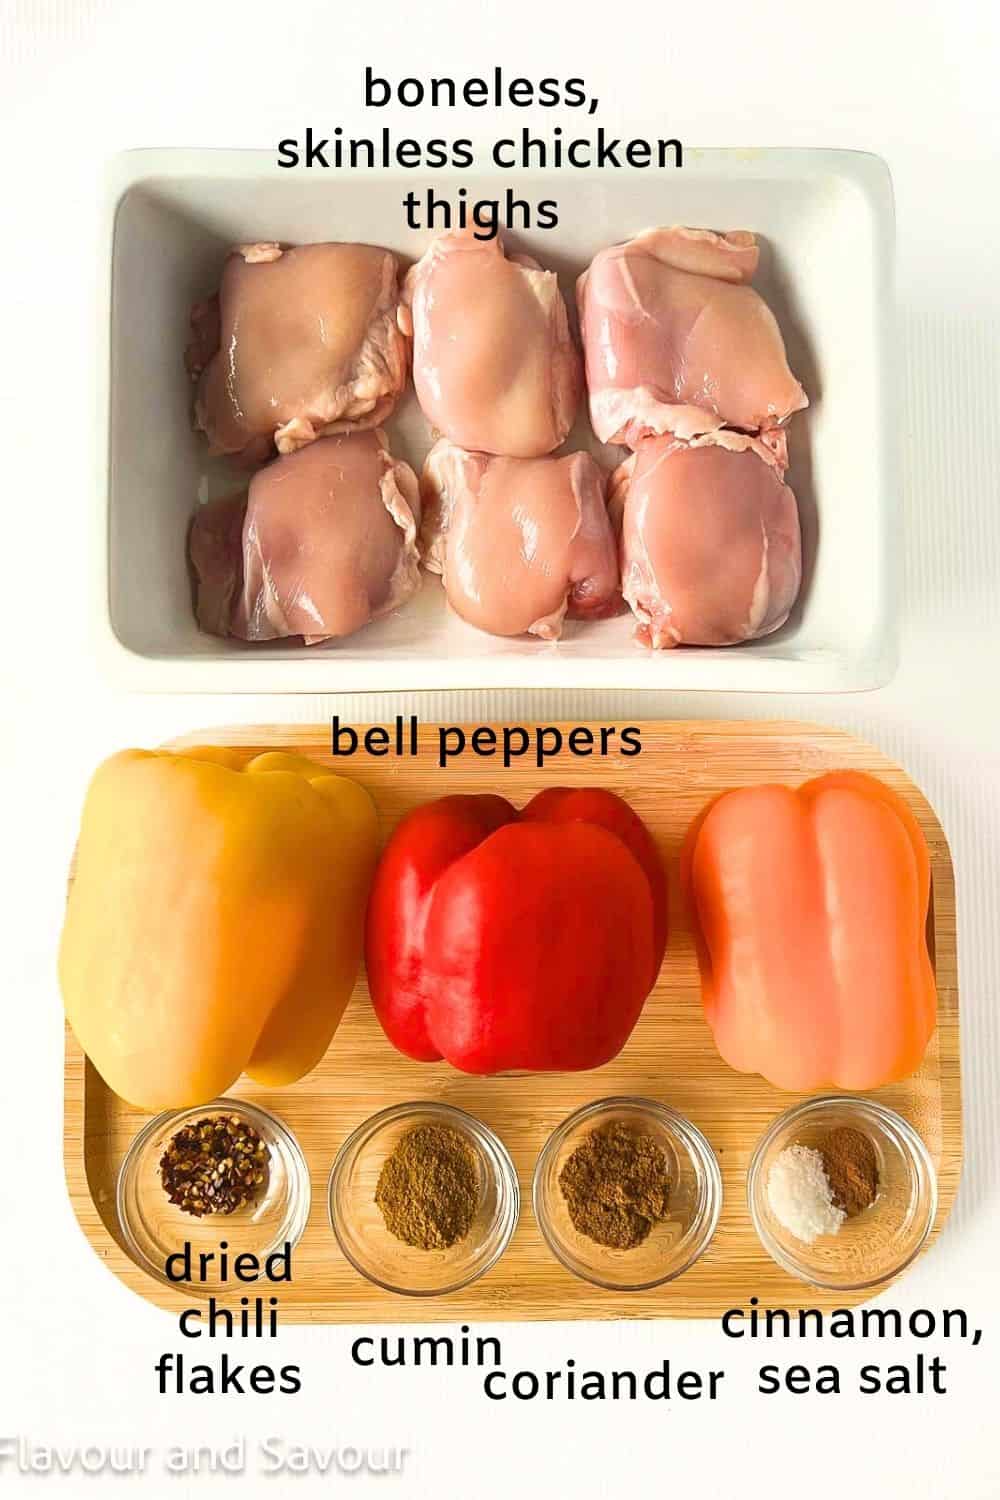 Labelled ingredients for Moroccan style chicken with peppers: boneless skinless chicken thighs, bell peppers, dried chili flakes, cumin, coriander, cinnamon, sea salt.